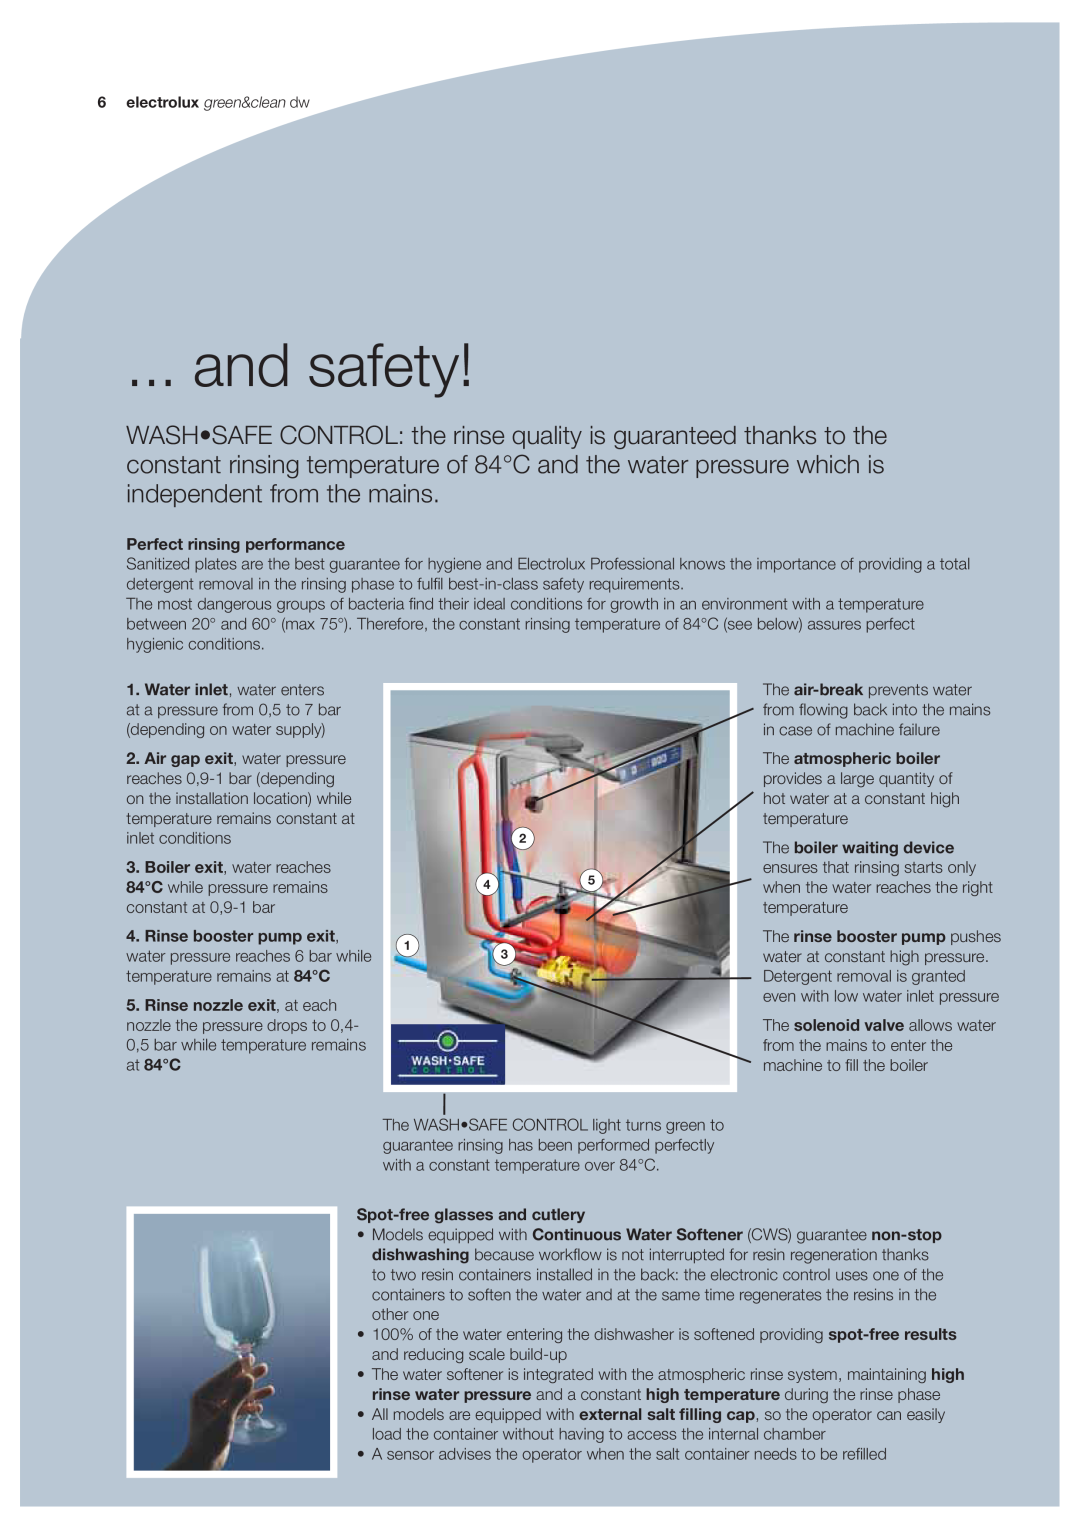 Electrolux EUCAIWL and safety, Perfect rinsing performance, Water inlet , water enters, The atmospheric boiler, at 84C 